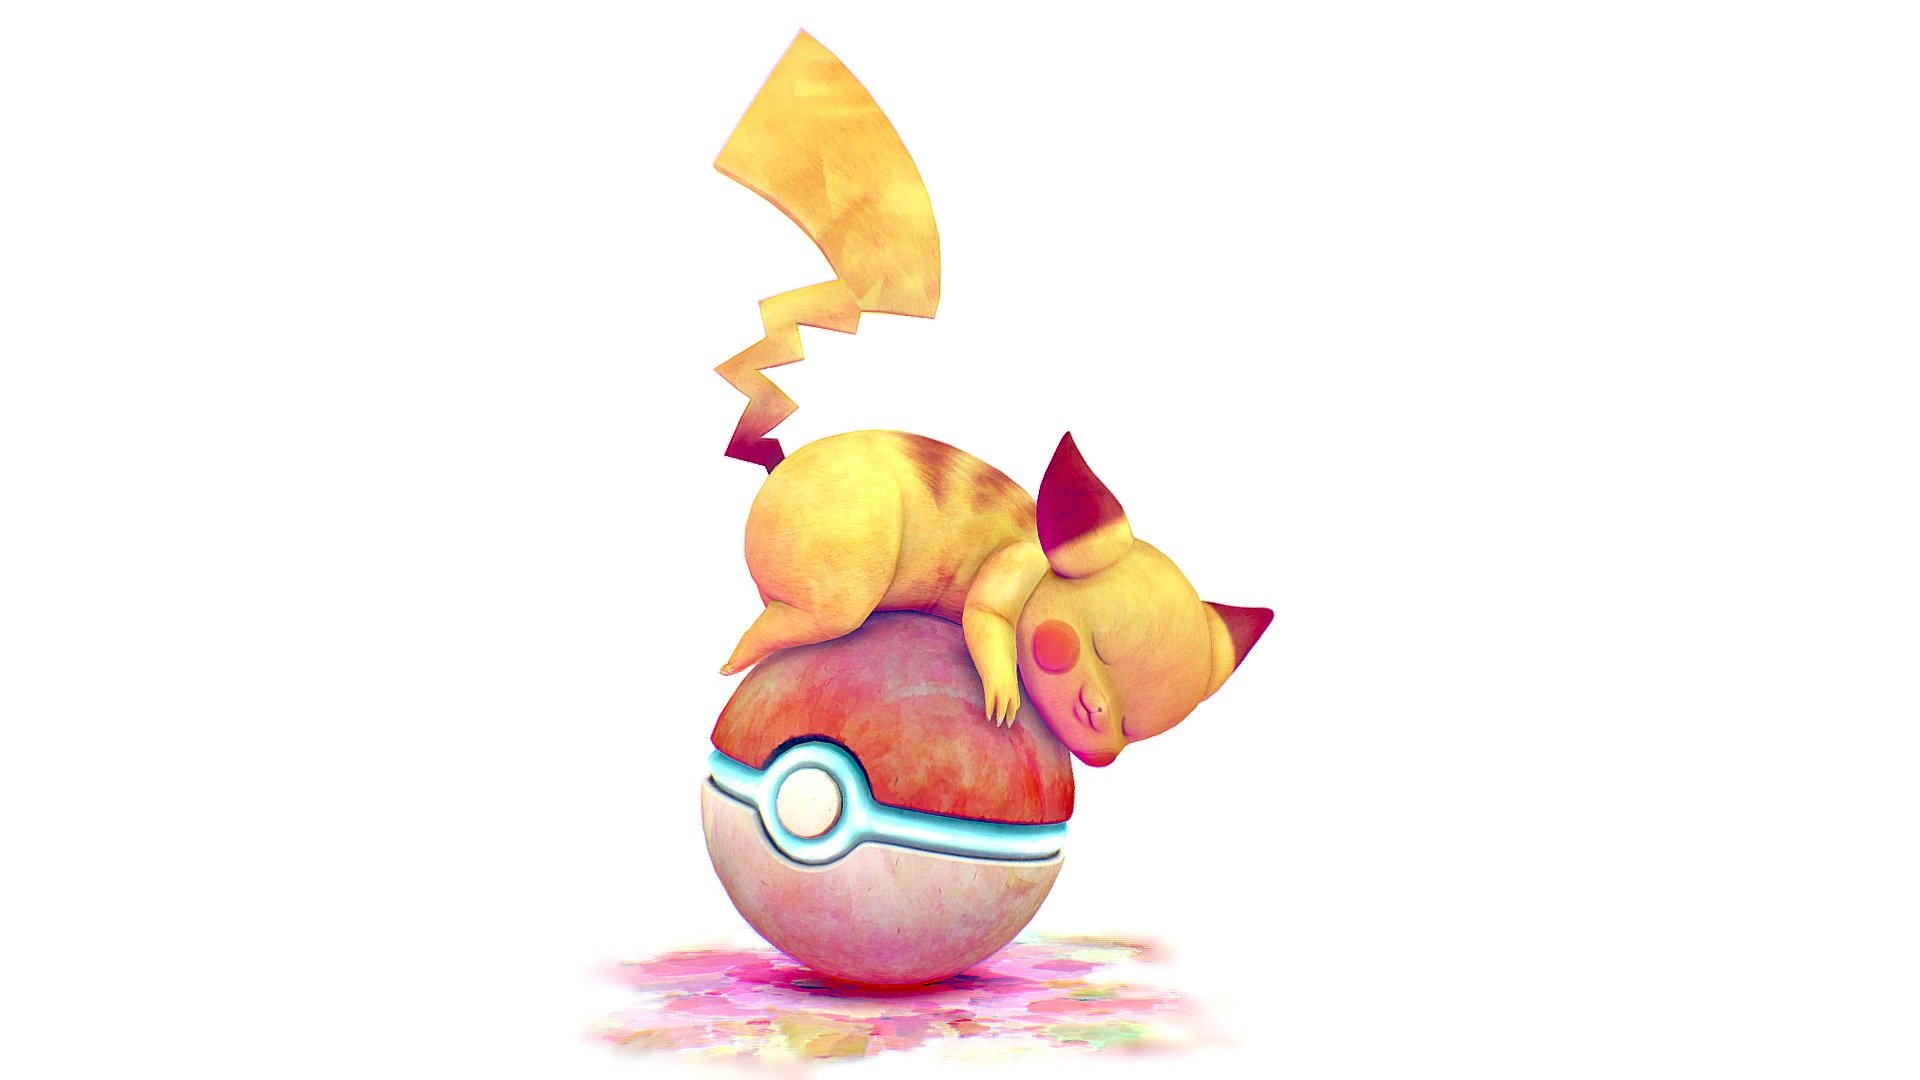 A  3D concept of a sleepy pikachu done with Zbrush and Substance Painter. I hope you'll like it :)

You can find a Renderman rendered version here : https://www.artstation.com/artwork/ZG5vnN

It's based on an original concept by Manino :
https://images.hdqwalls.com/download/pokemon-cute-artwork-1h-2048x1152.jpg

Feel free to browse my Artstation &amp; Instagram profiles for more art 3d model